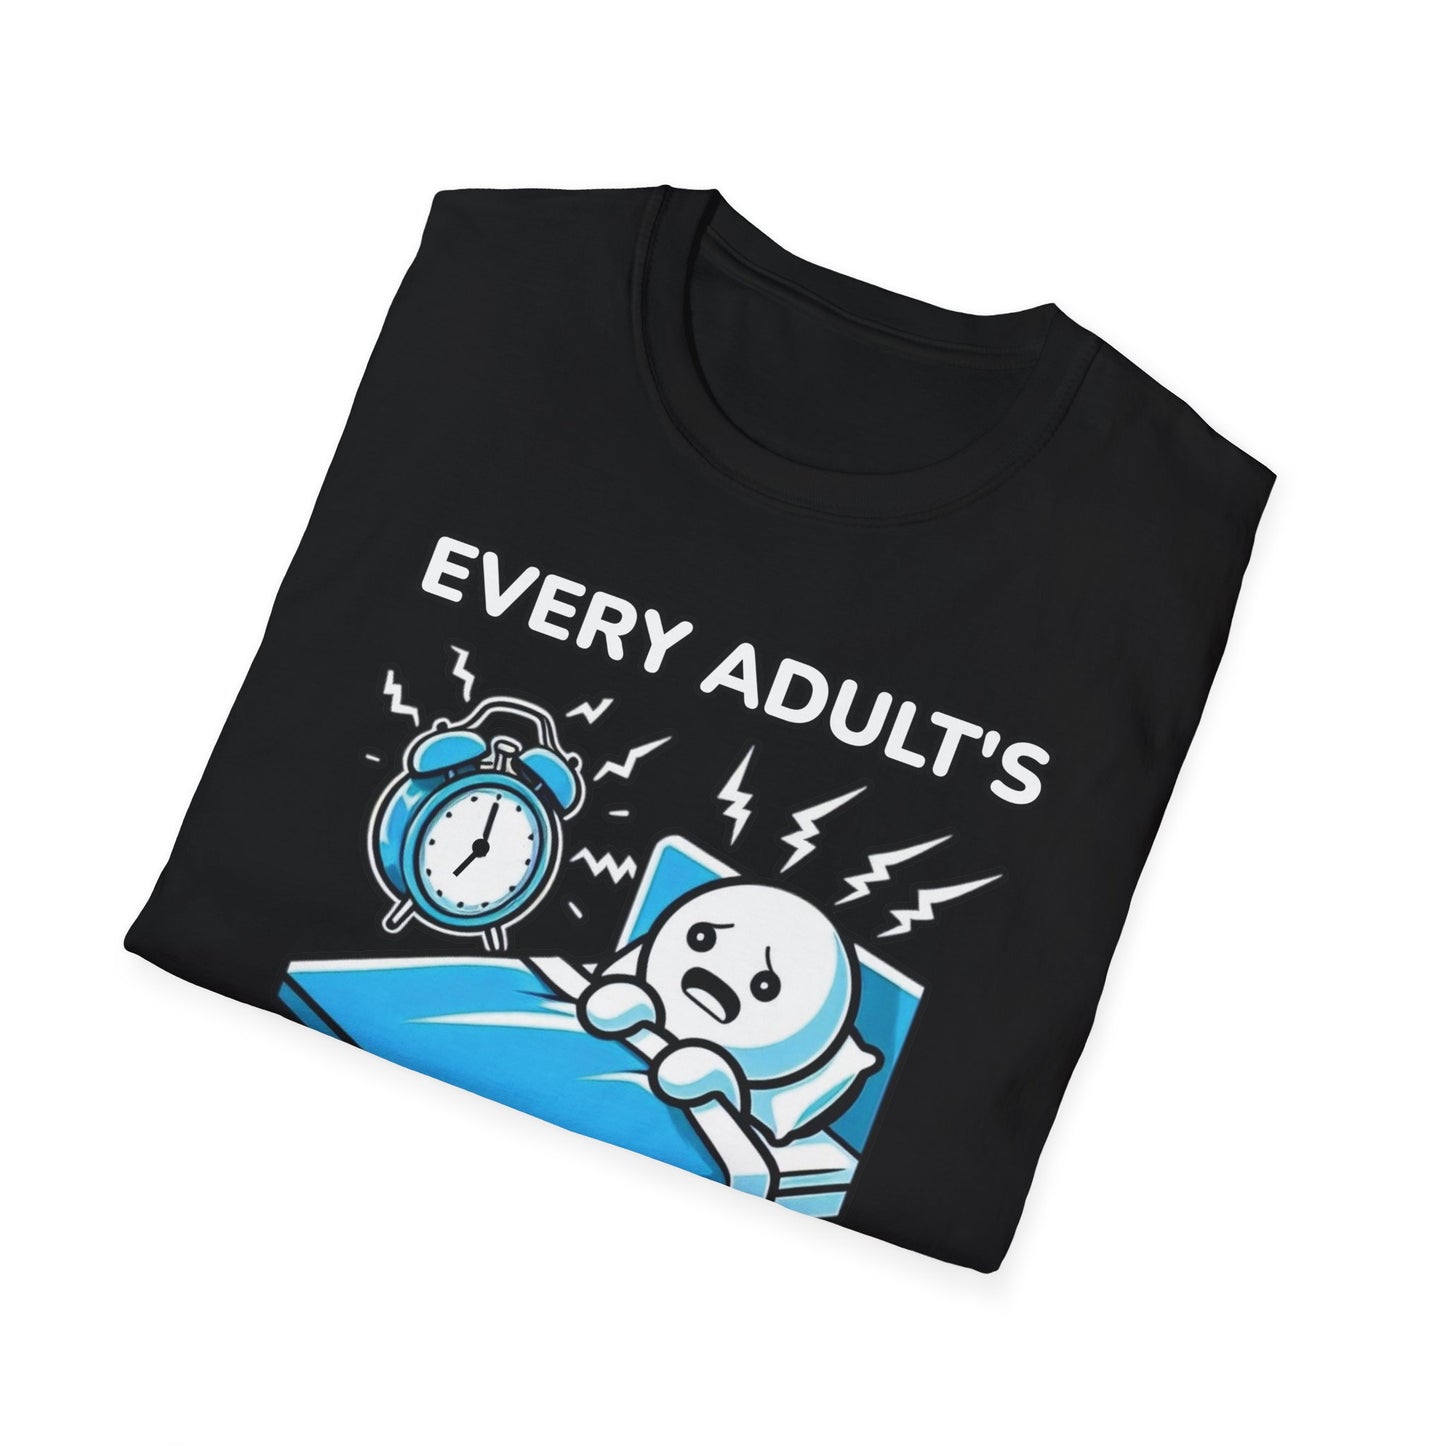 Get Comfy with Adulting: Hilarious Meme Humor on 100% Cotton Graphic Tee, Soft, Comfy, and Unisex Chic